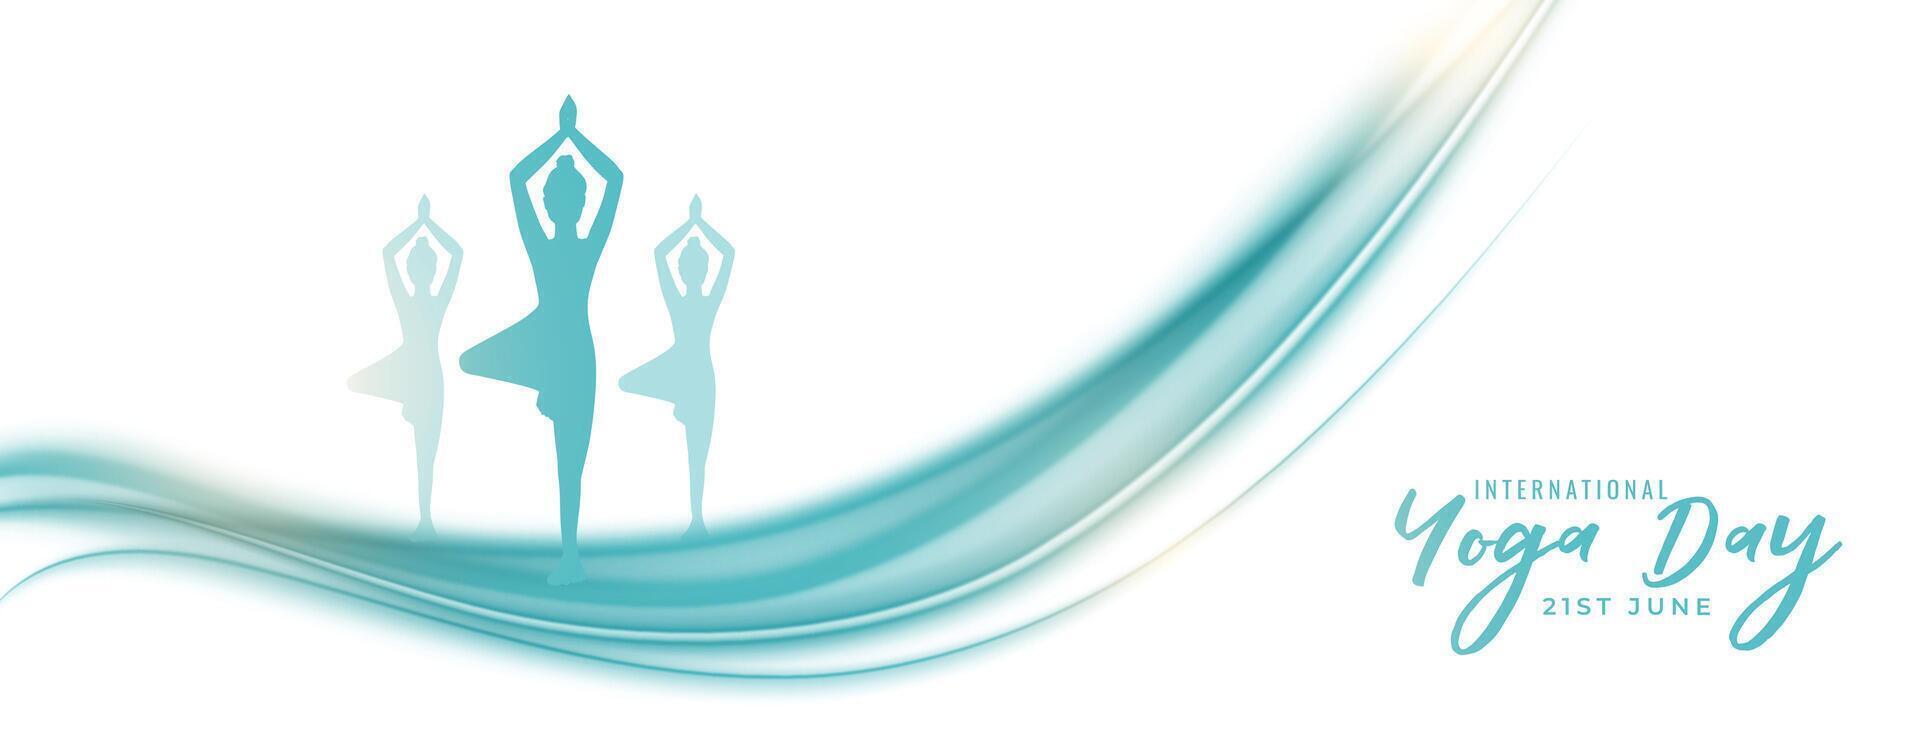 modern 21st june world yoga day banner for healthy lifestyle vector